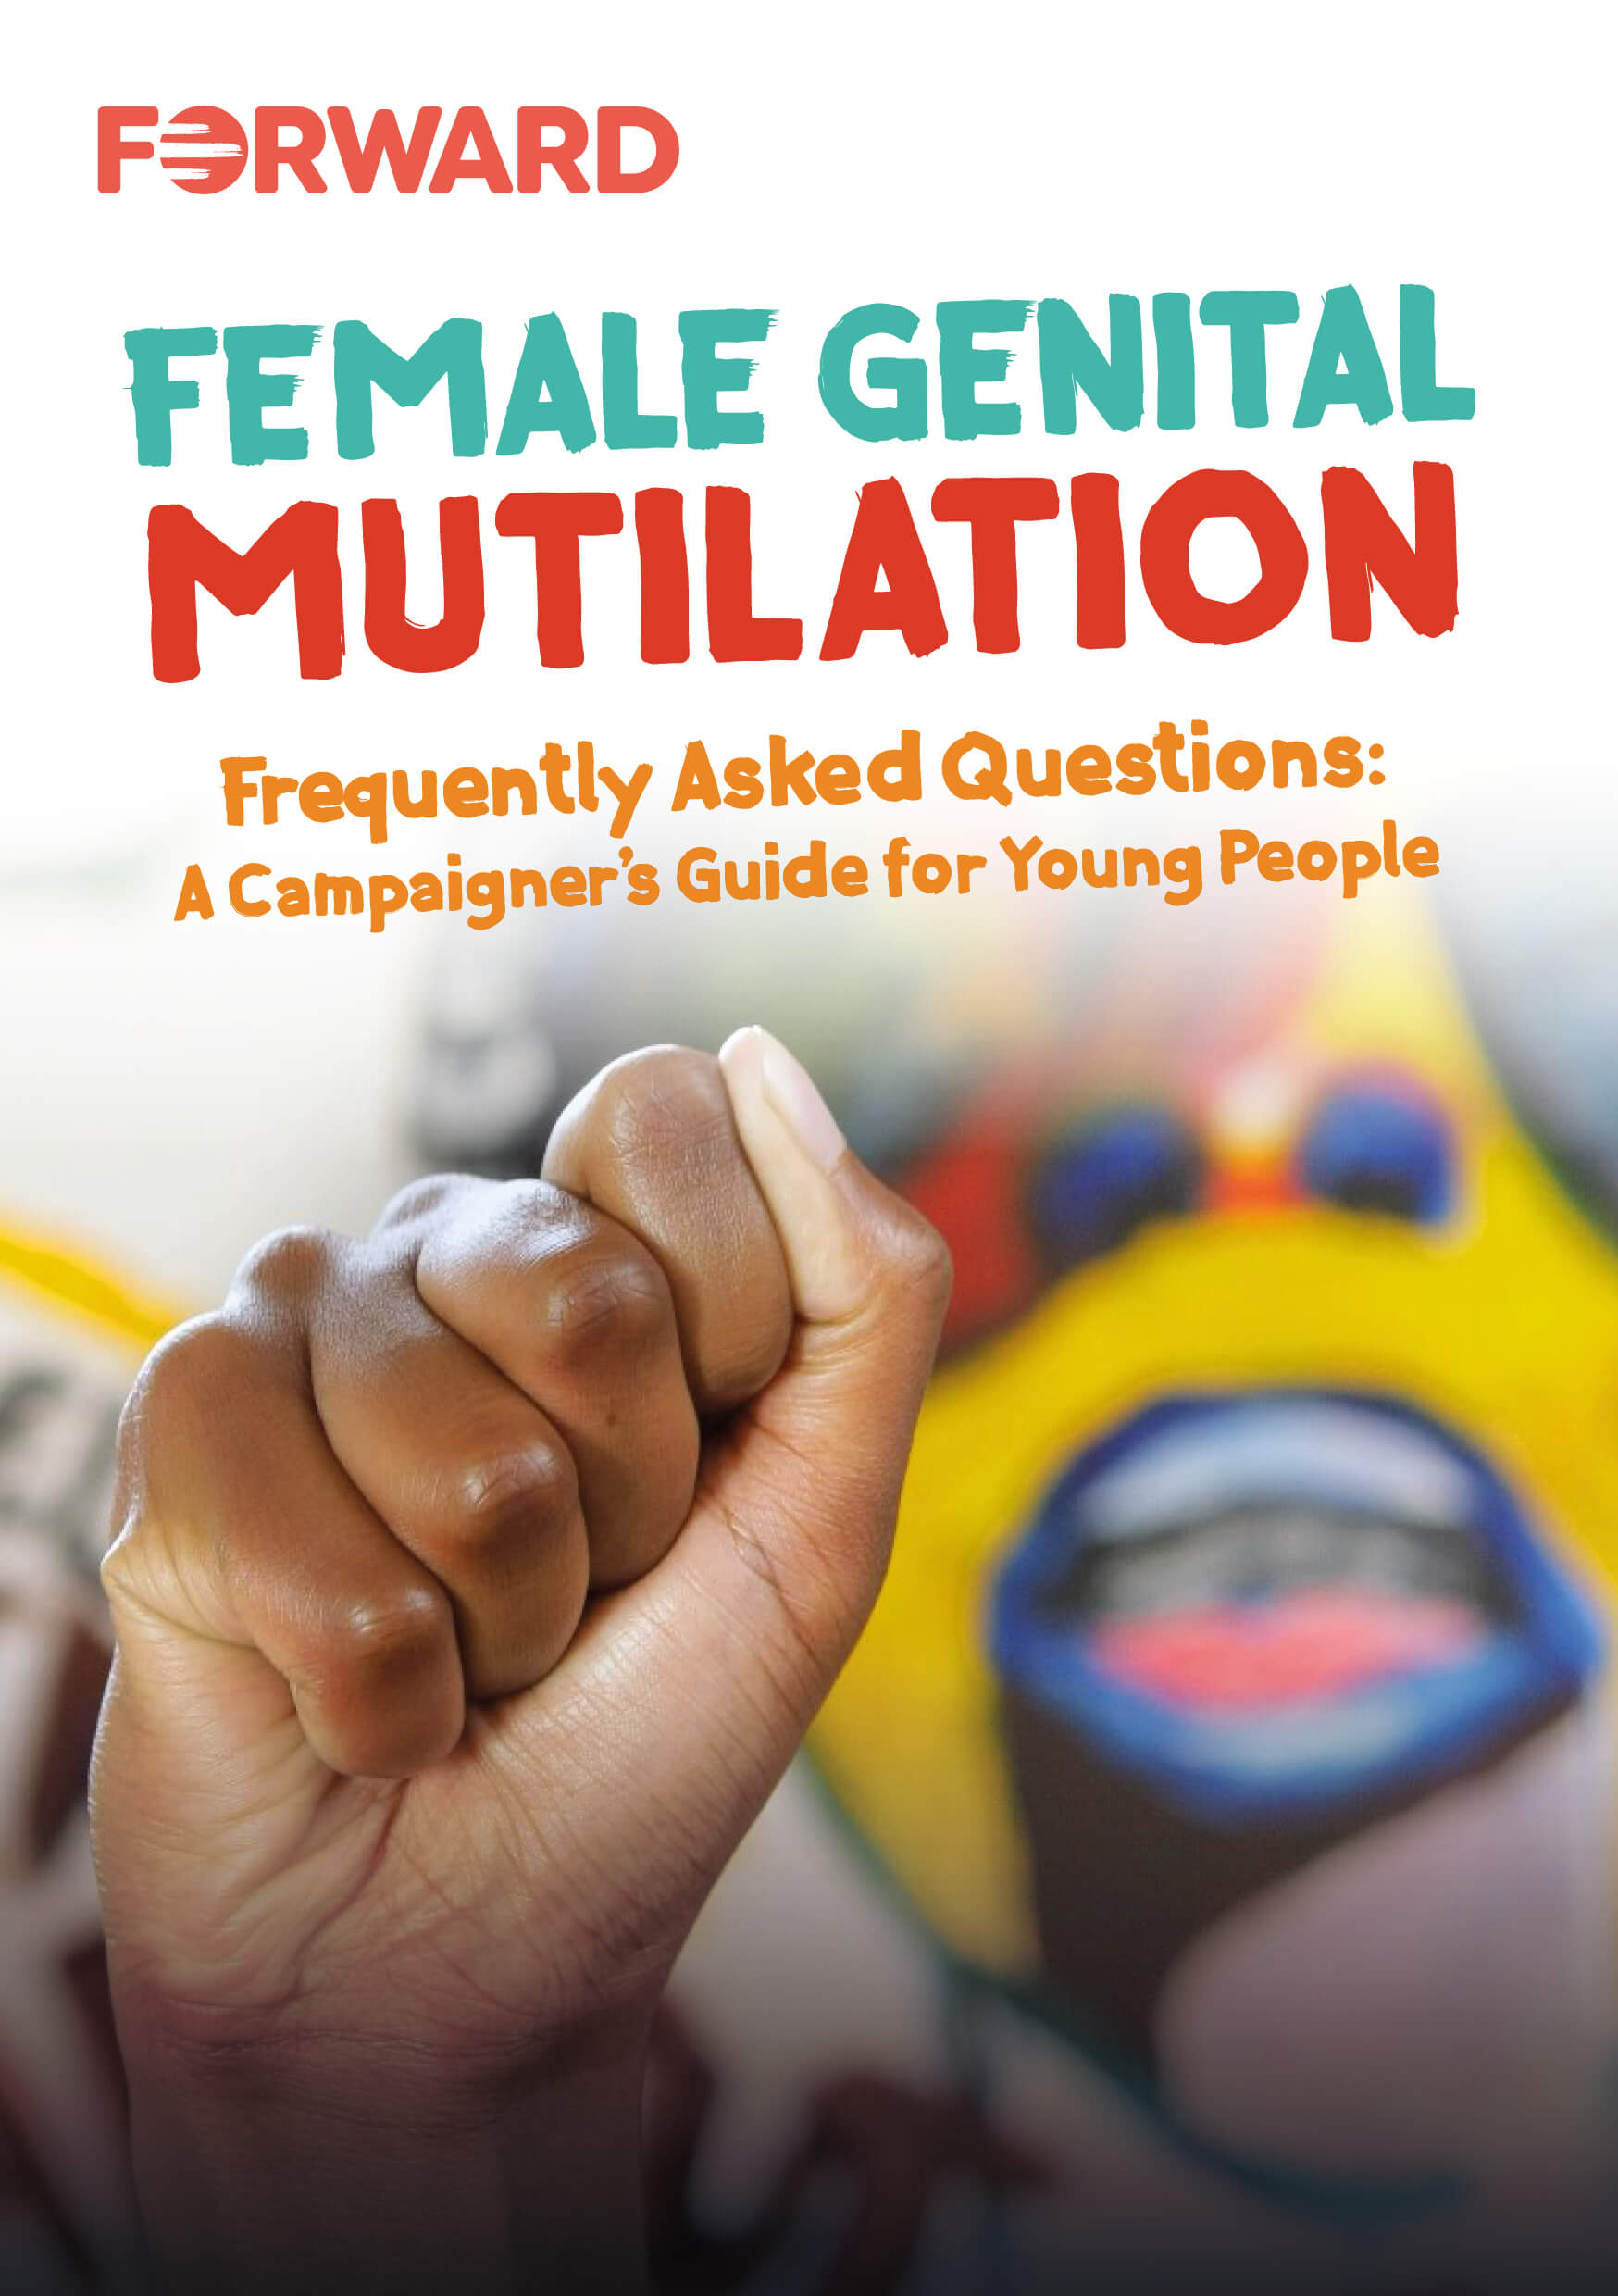 FGM FAQs: A Campaigner’s Guide for Young People